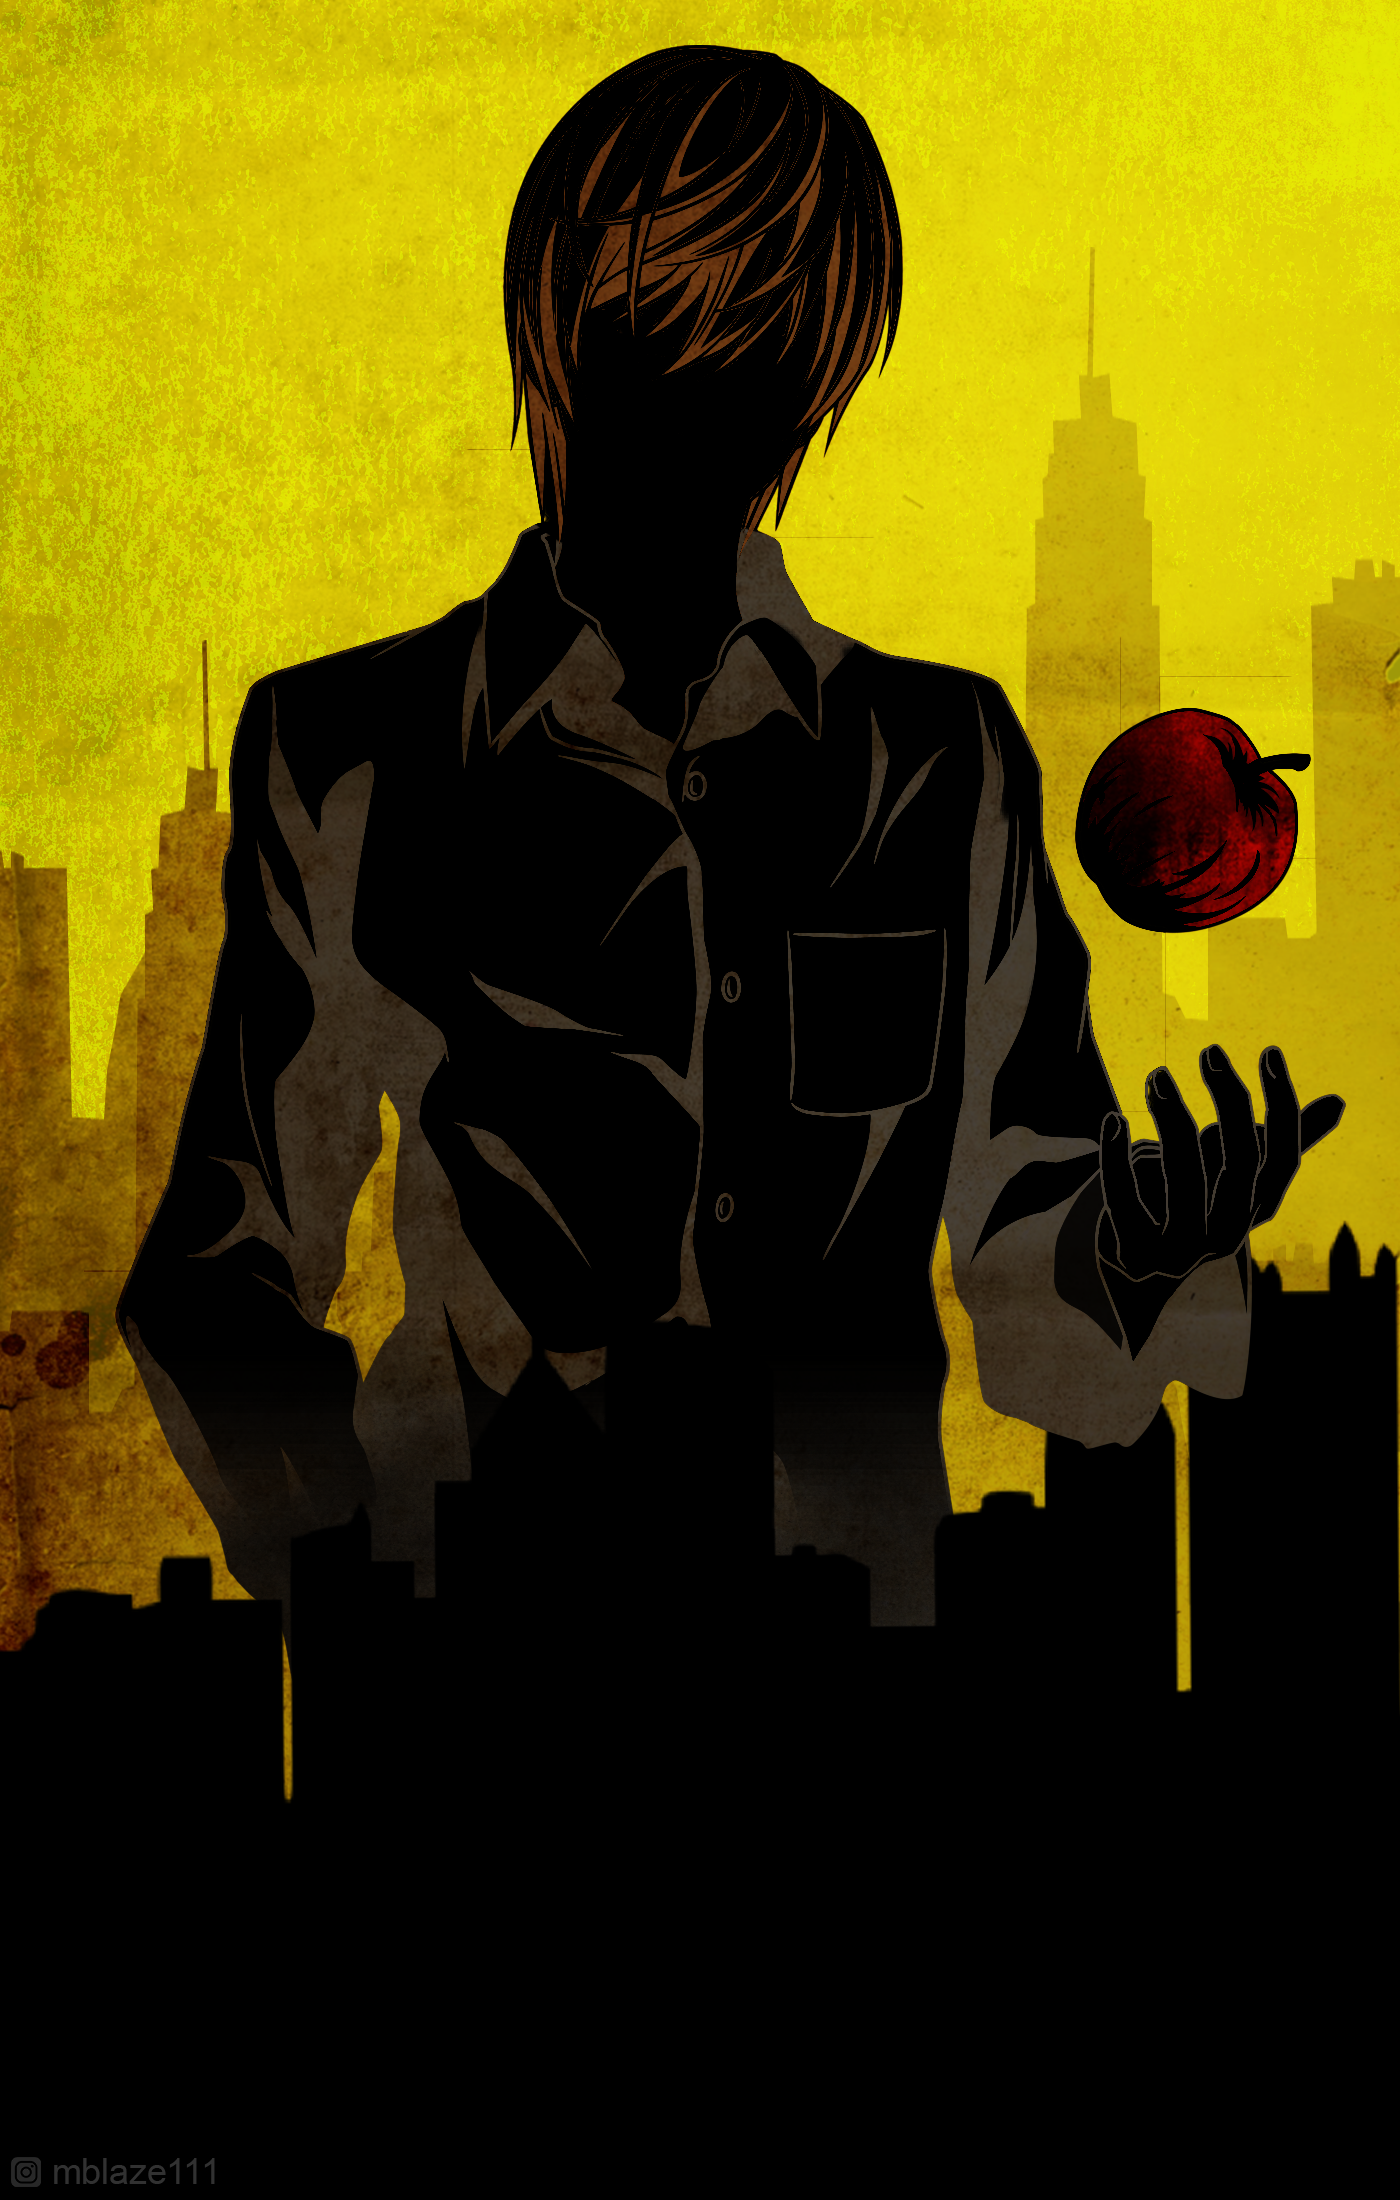 Light Yagami Wallpaper I made. Hope you guys like it.: deathnote